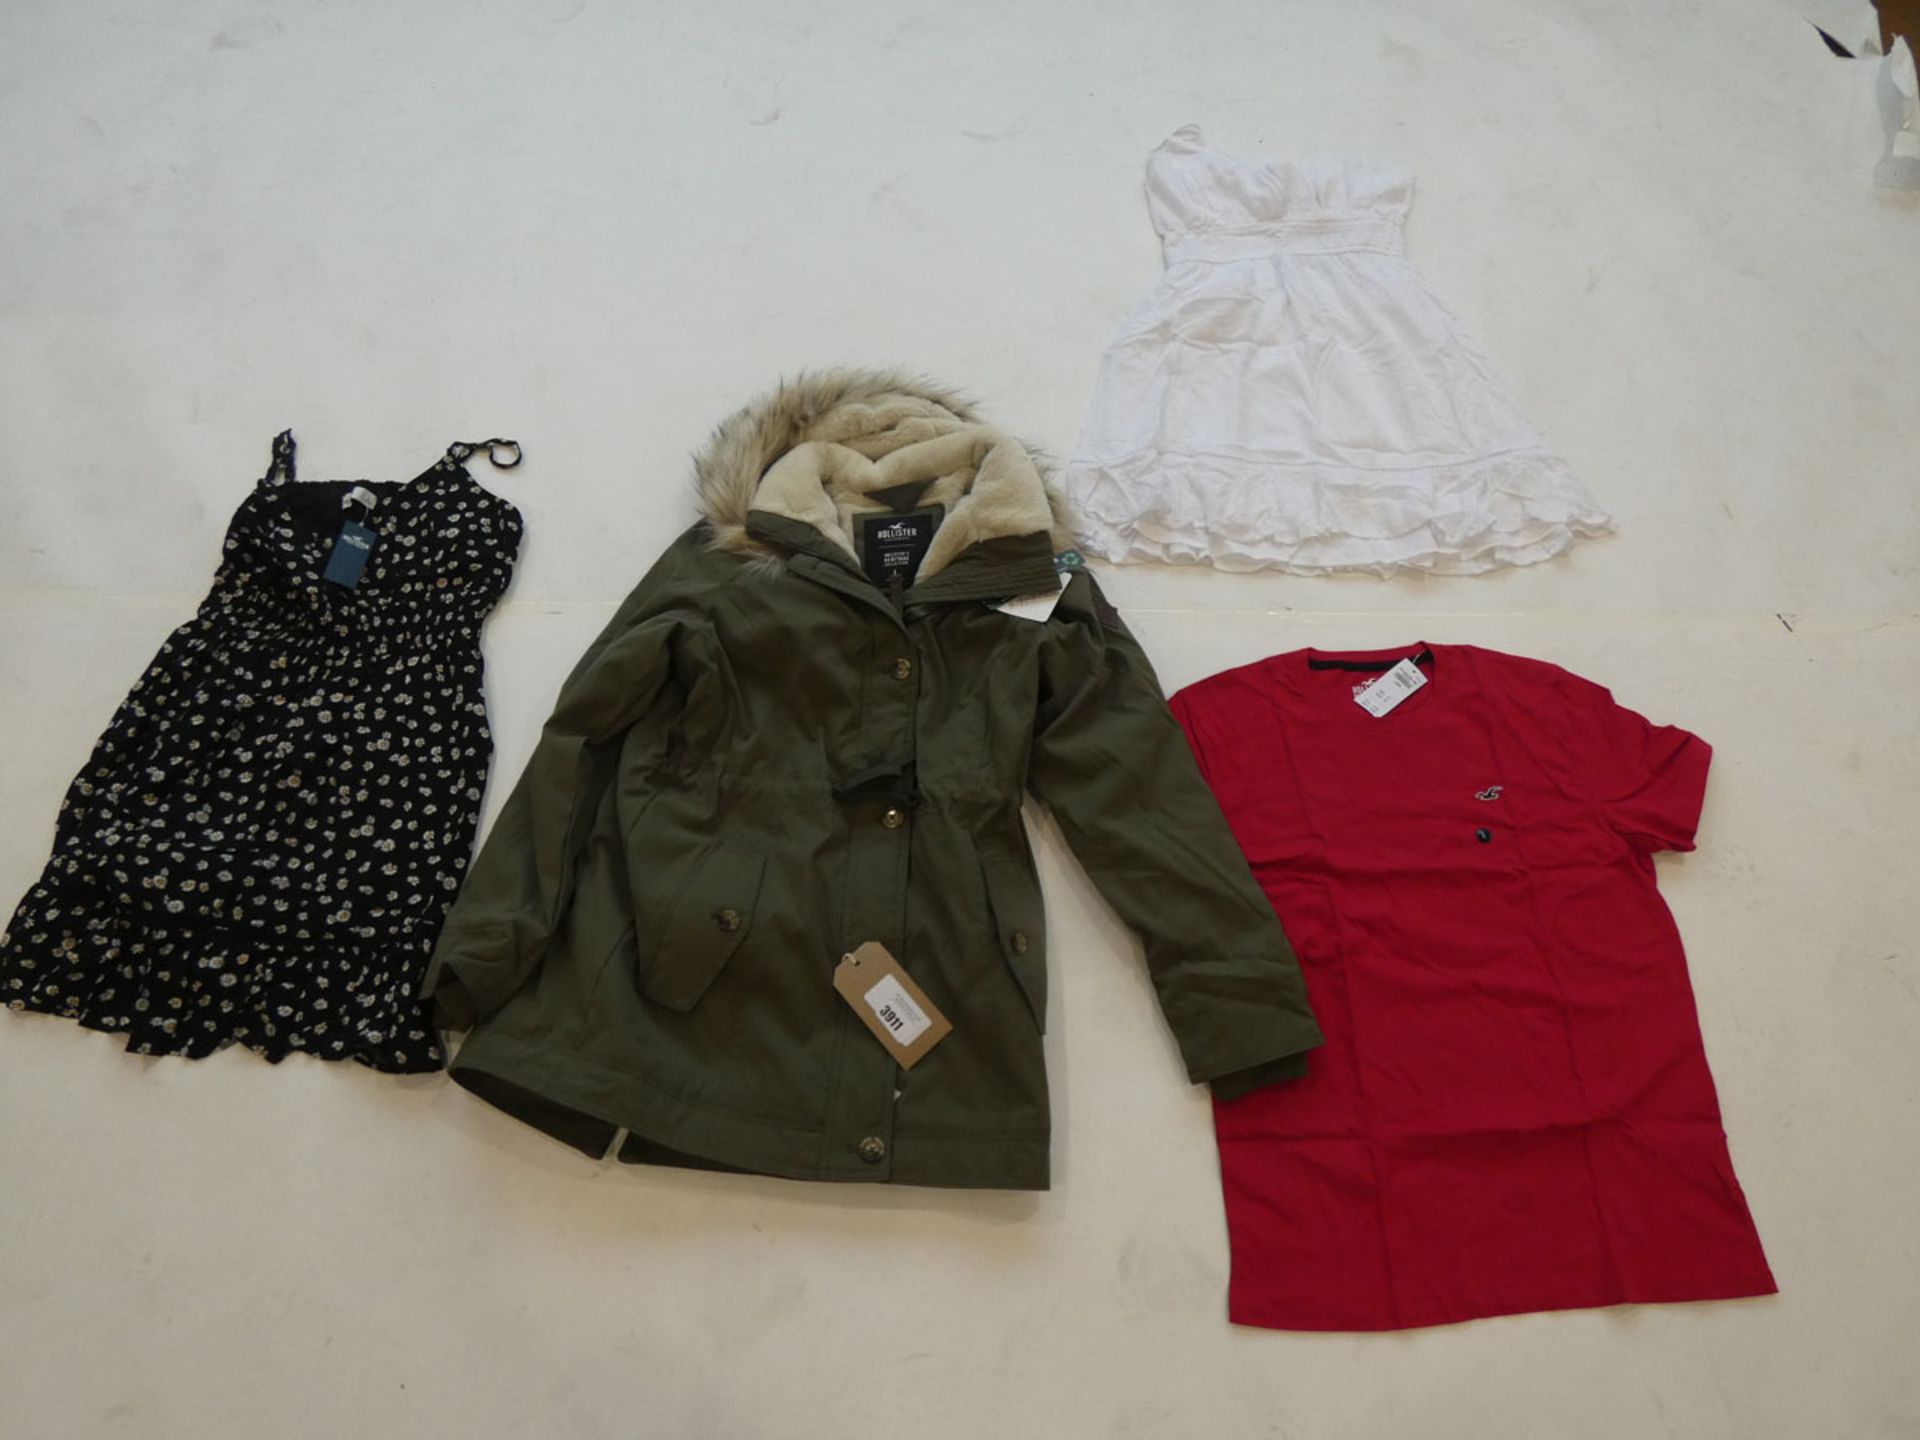 Selection of Hollister clothing to include jacket and tops all size large